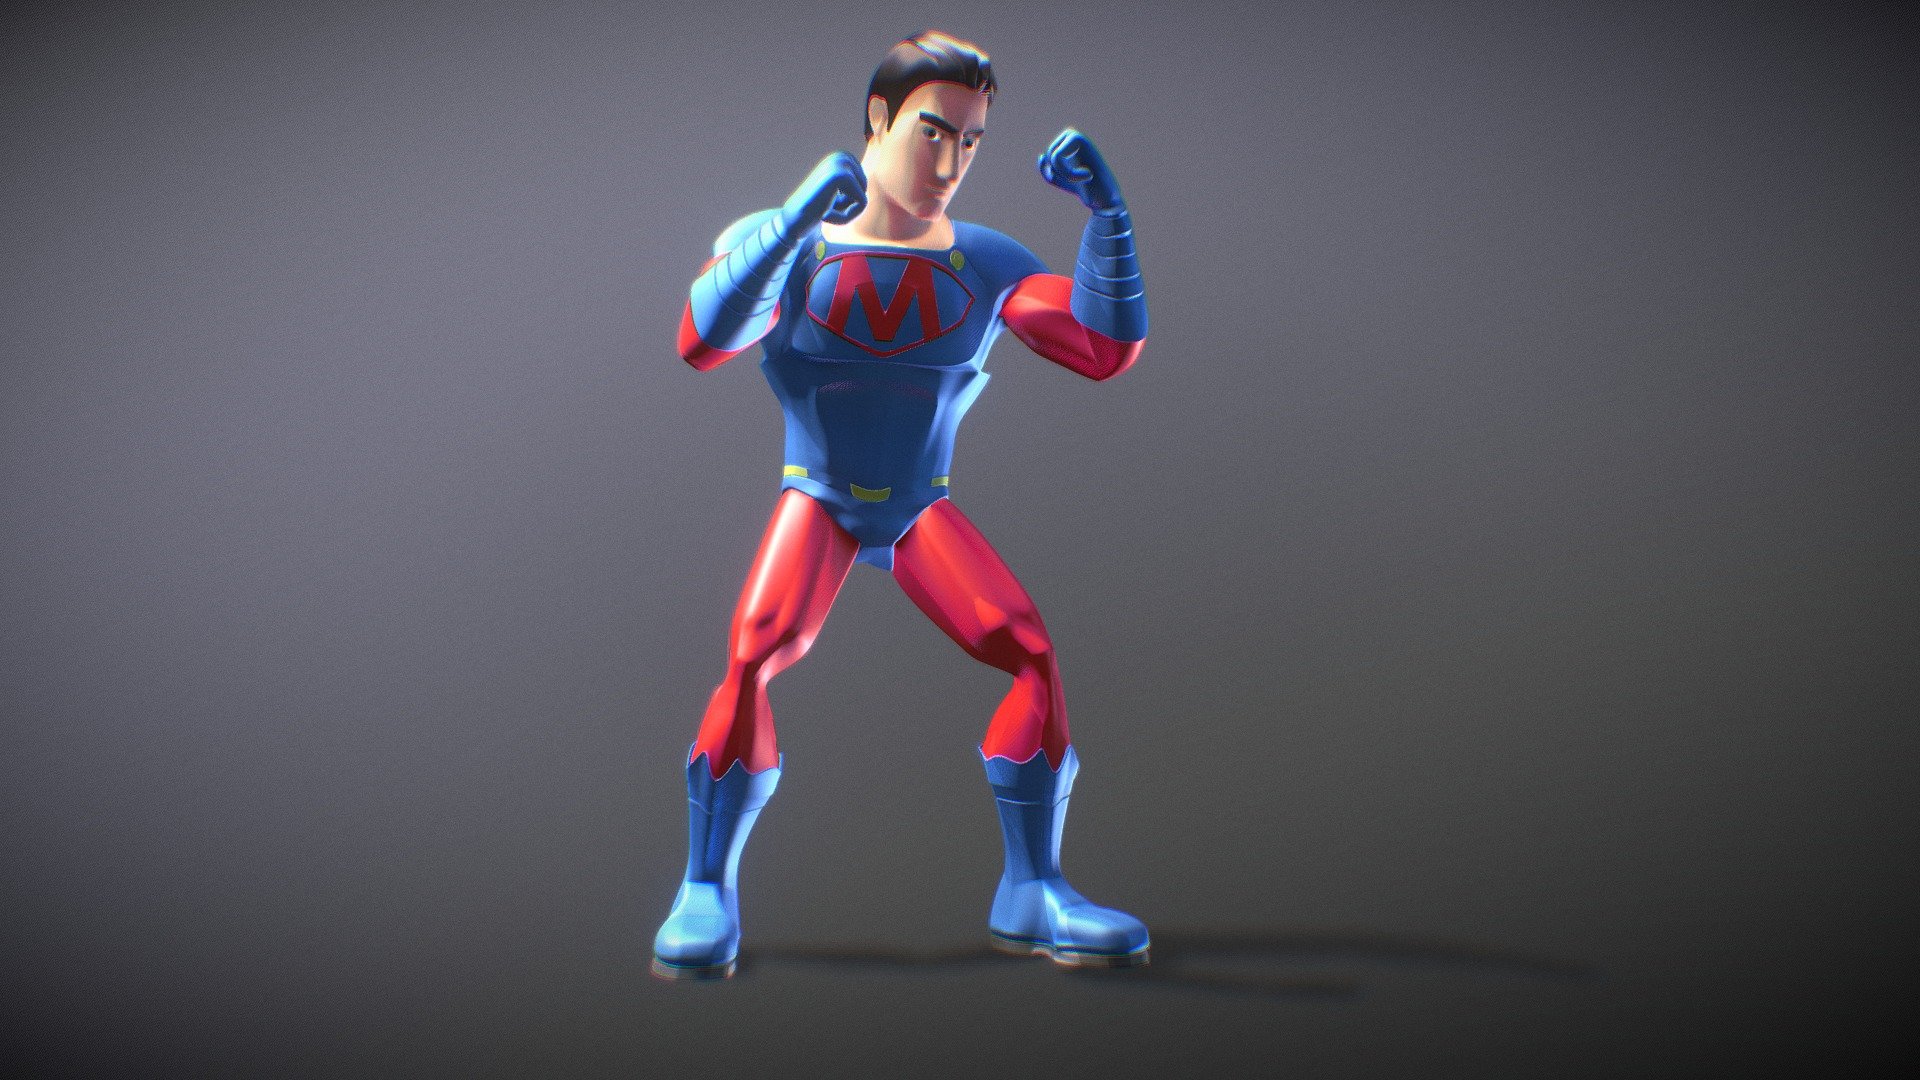 Character of a superhero in cartoon style, modeled in 3dsmax, rigedd. Hope you liked it! - Super hero Man - 3D model by 3DMark (@gabo08) 3d model